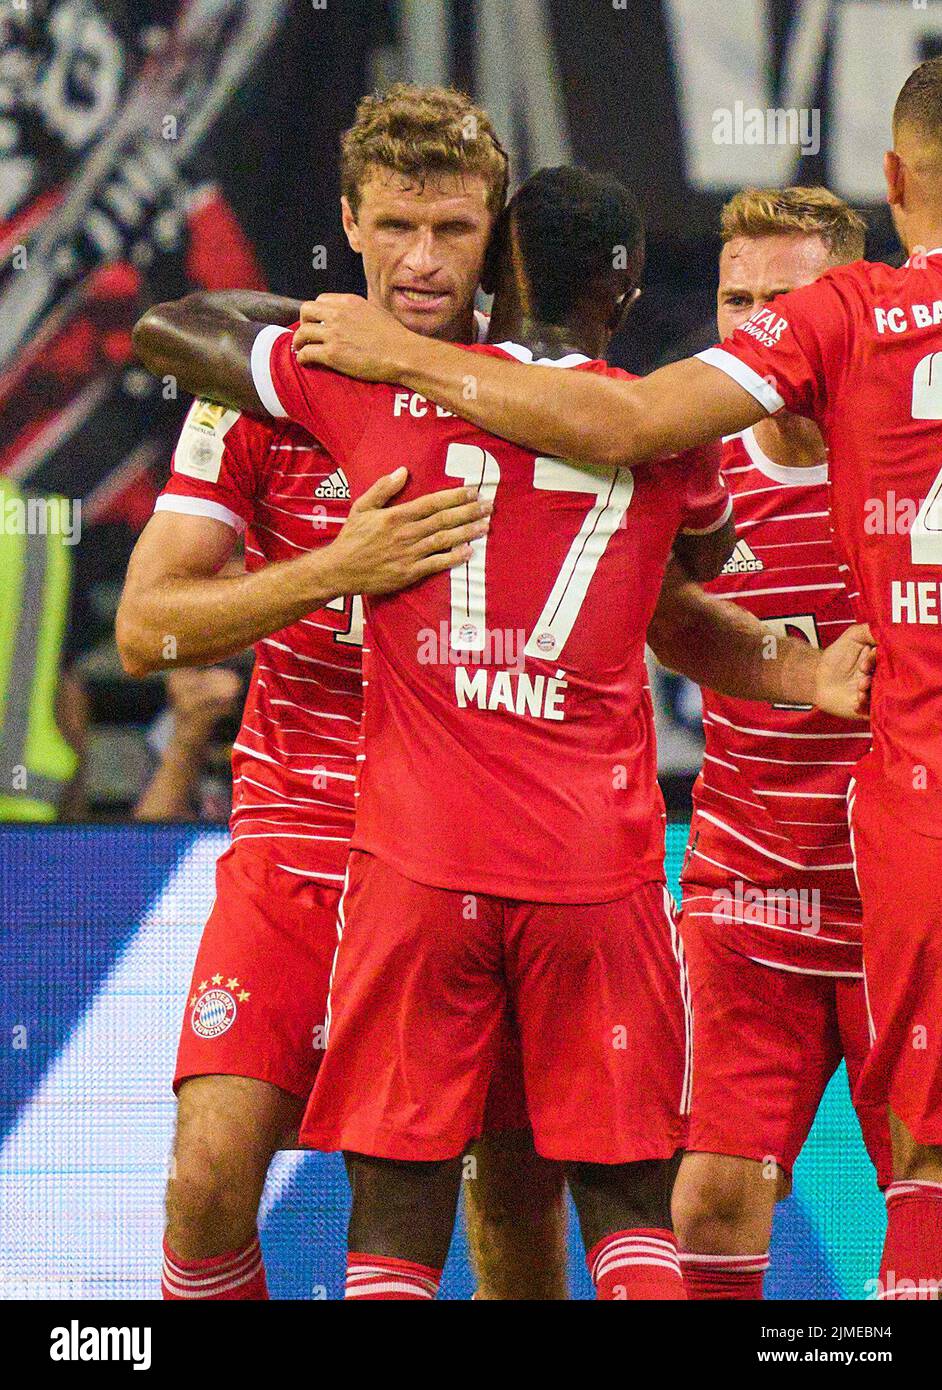 Thomas MUELLER, MÜLLER, FCB 25 celebrates his goal, happy, laugh, celebration, 0-4 with assist Sadio Mane (FCB 17)  in the match EINTRACHT FRANKFURT - FC BAYERN MÜNCHEN  1.German Football League on Aug 05, 2022 in Frankfurt, Germany. Season 2022/2023, matchday 1, 1.Bundesliga, FCB, Munich, 1.Spieltag © Peter Schatz / Alamy Live News    - DFL REGULATIONS PROHIBIT ANY USE OF PHOTOGRAPHS as IMAGE SEQUENCES and/or QUASI-VIDEO - Stock Photo